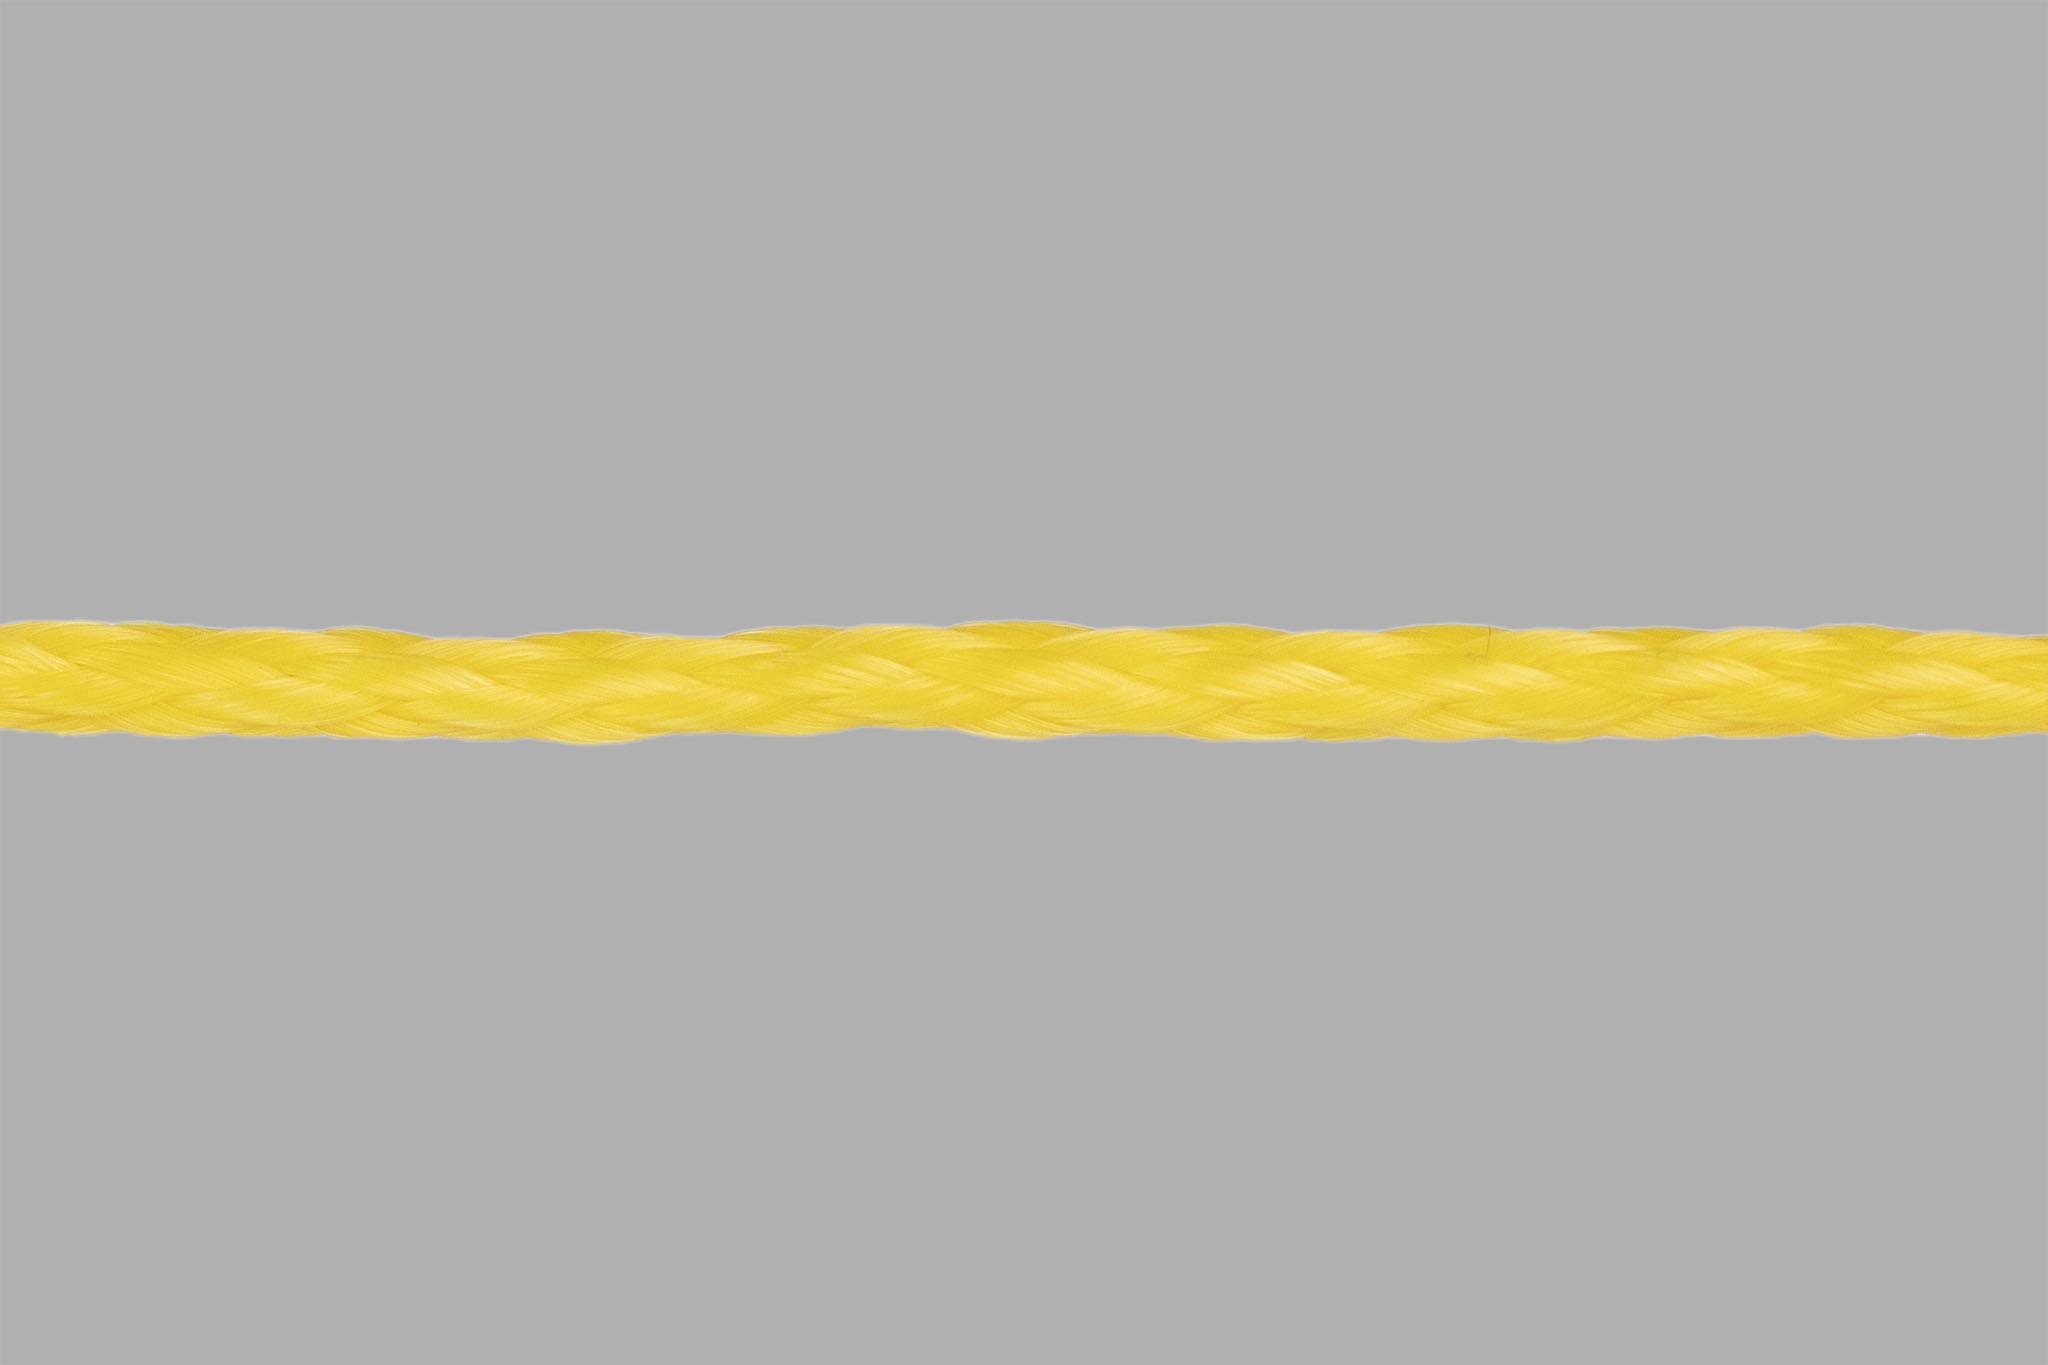 Yellow Made in USA 5/16" 100 ft of hollow braid 8 Strand Polypropylene rope